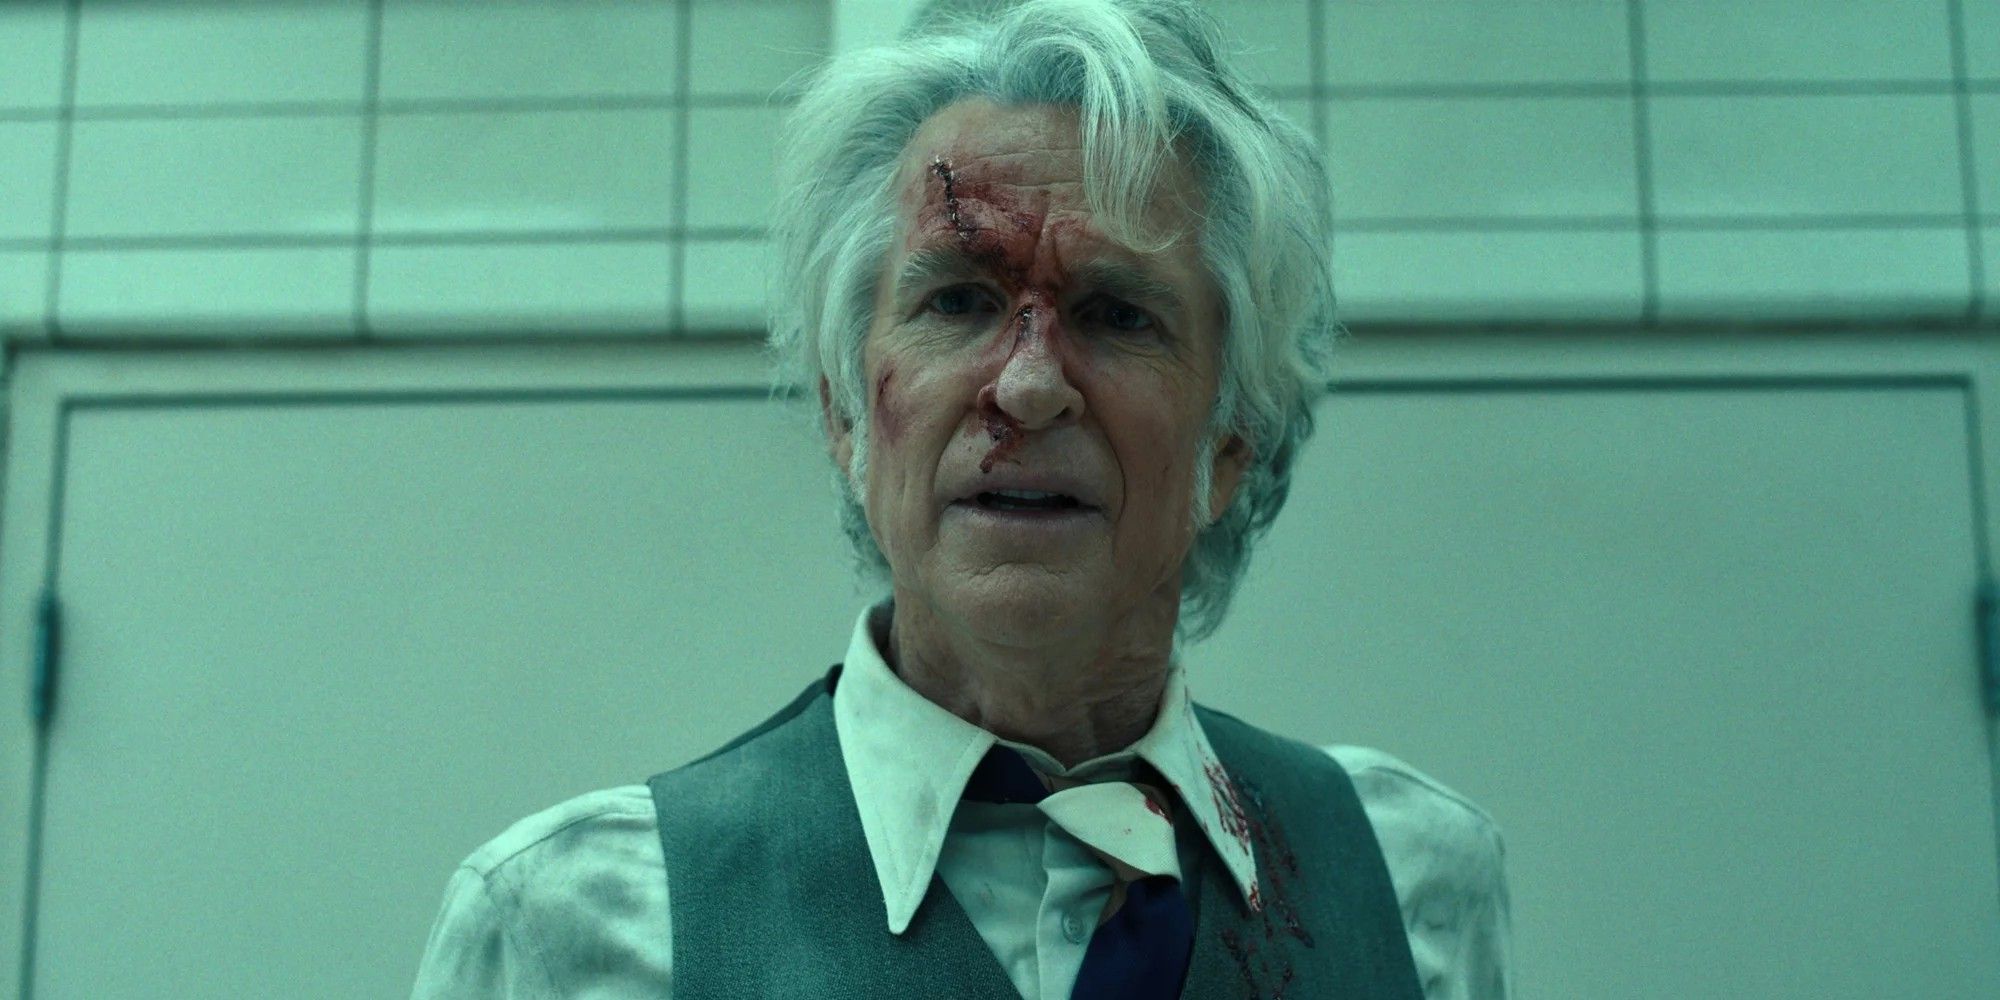 Dr. Brenner, played by Matthew Modine, in Netflix's Stranger Things